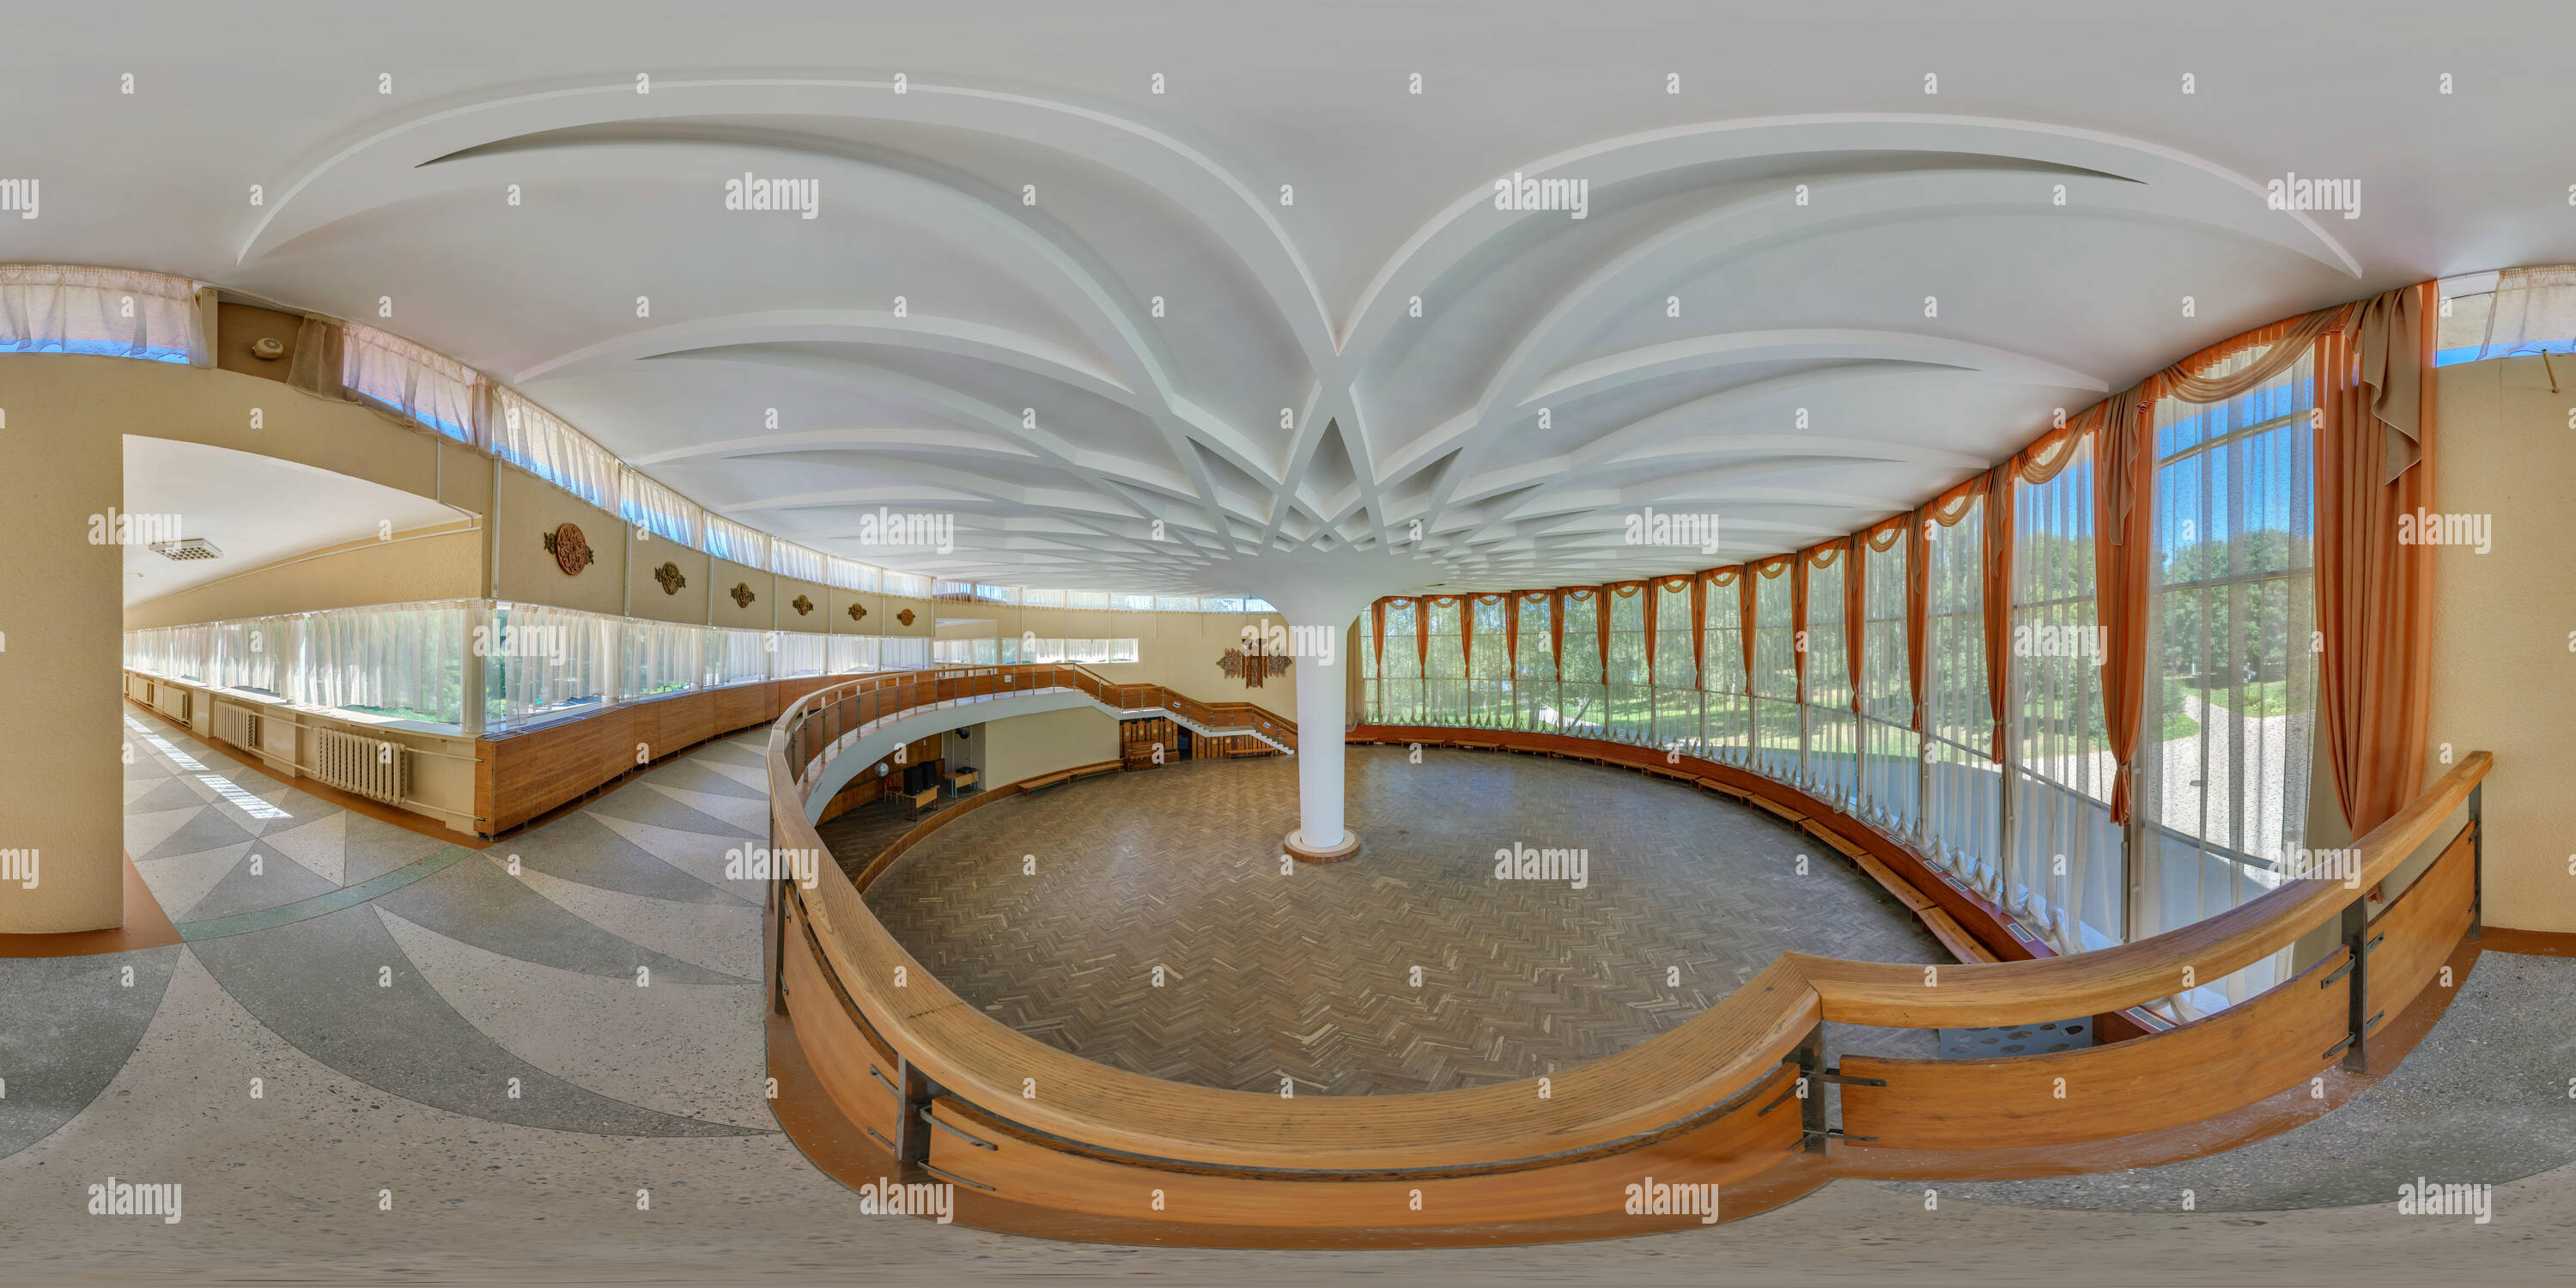 360 degree panoramic view of GRODNO, BELARUS - JULY 25, 2011:  Panorama in interior dance hall with staircase.  Full 360 by 180 degree seamless spherical panorama in equirectangul